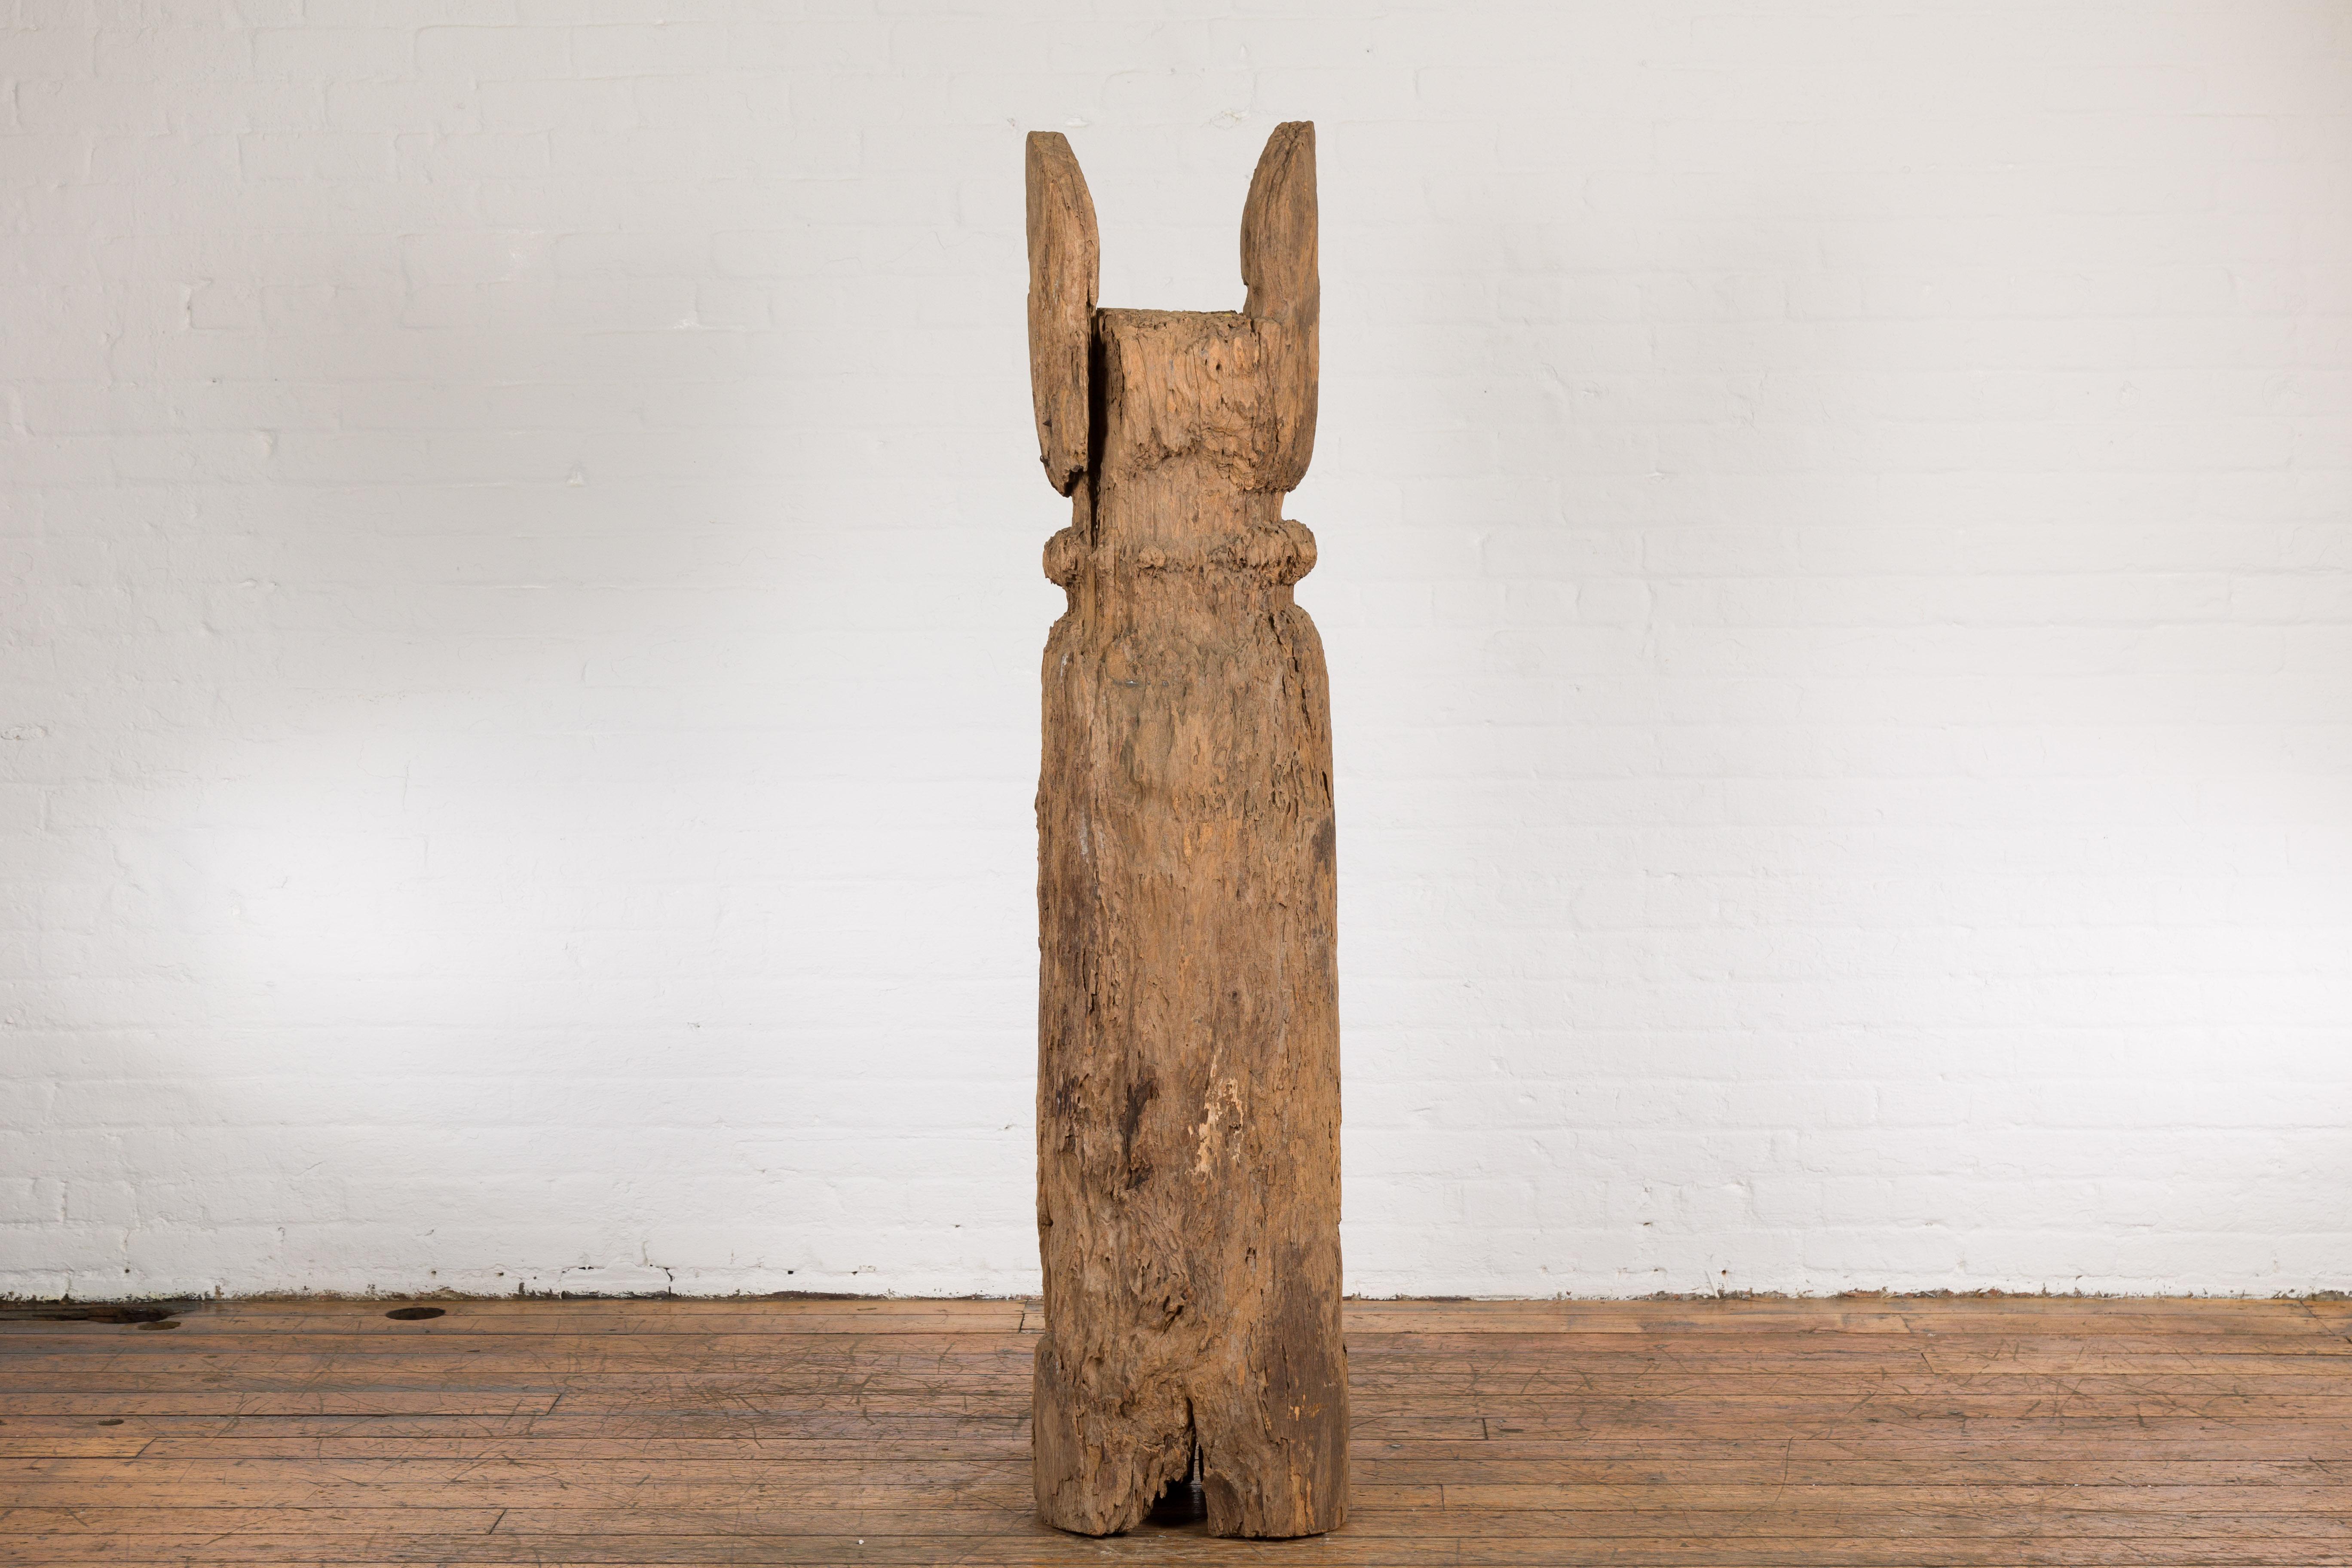 A Tribal antique 19th century rustic hand-carved Thai pole sculpture from the mountainous city of Chiang Mai, featuring a natural patina. Experience a touch of Thai history with this rustic, hand-carved pole sculpture hailing from the mountainous